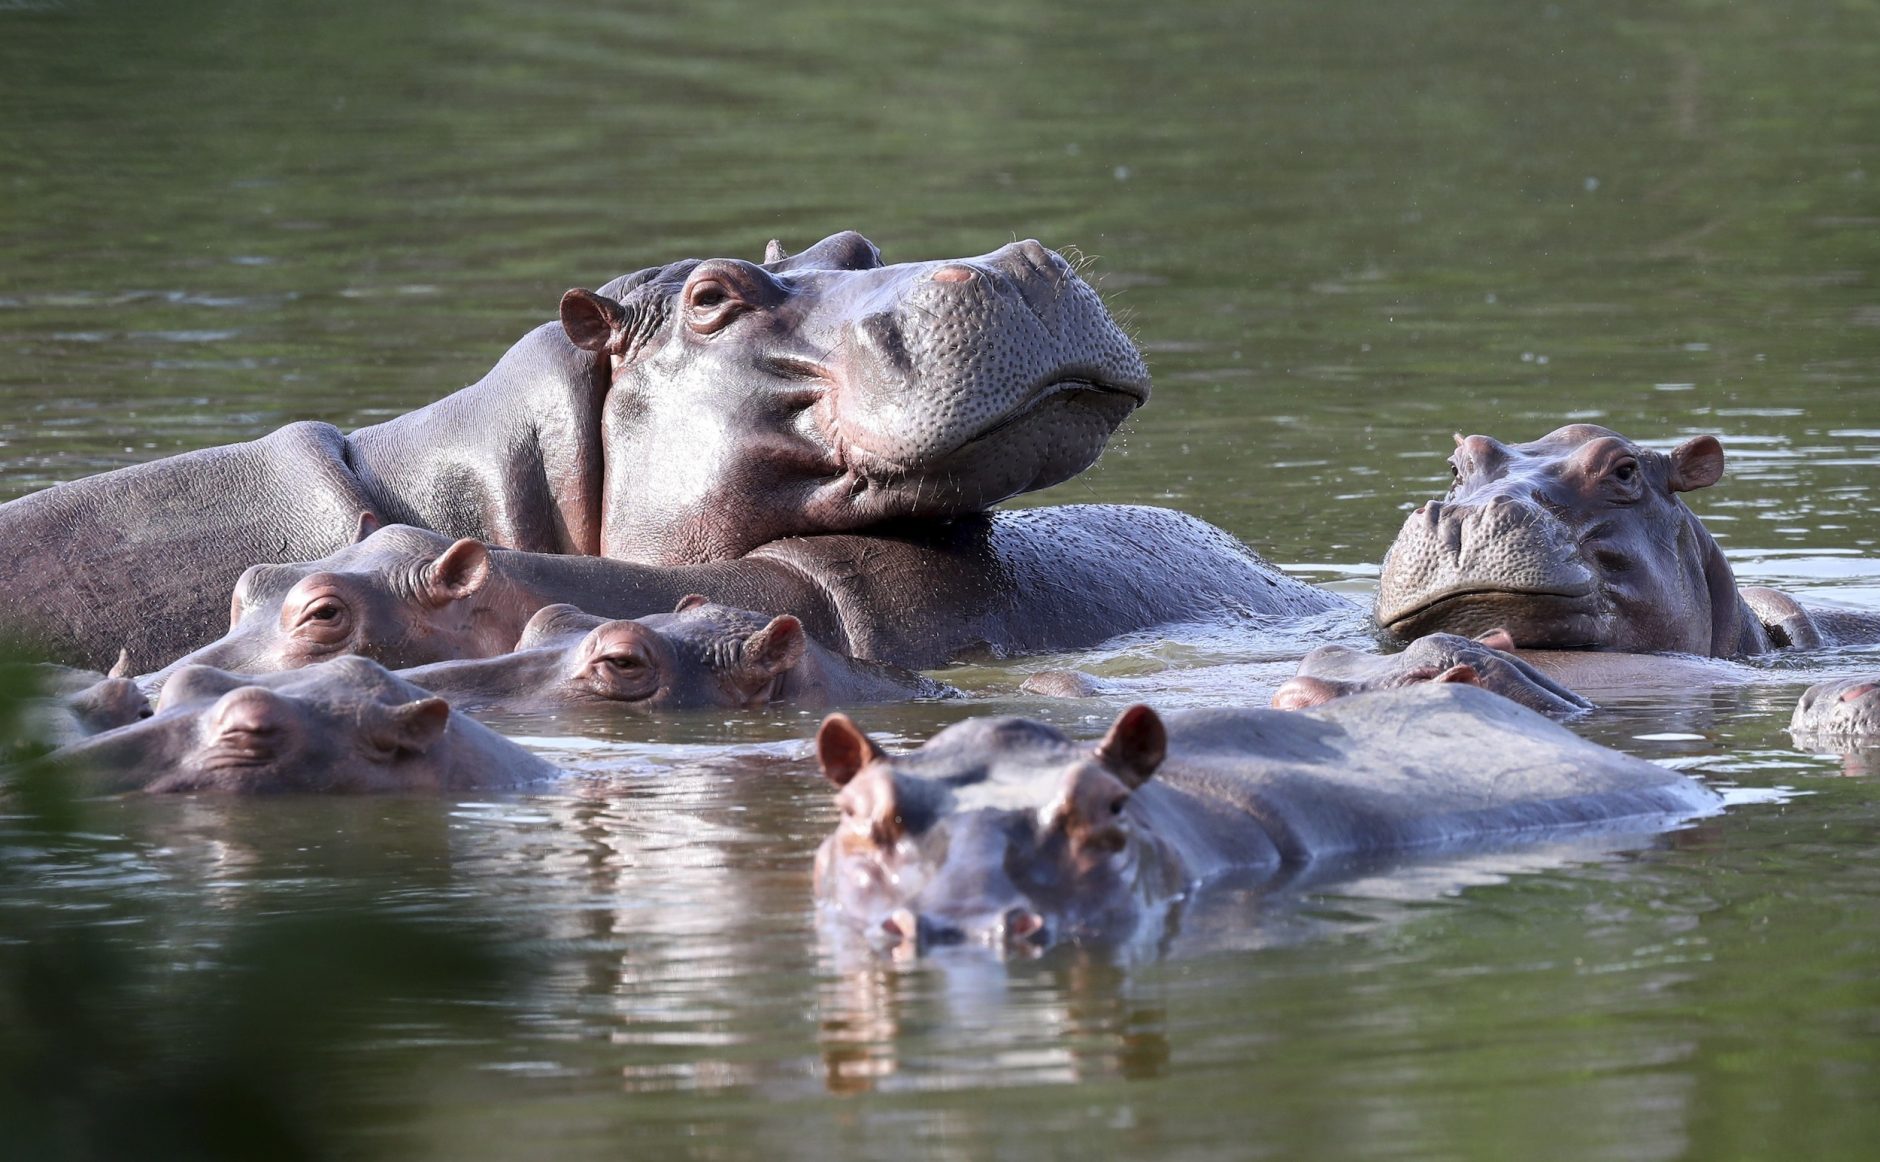 Animal advocates urge feds to put hippo on endangered species list |  Courthouse News Service